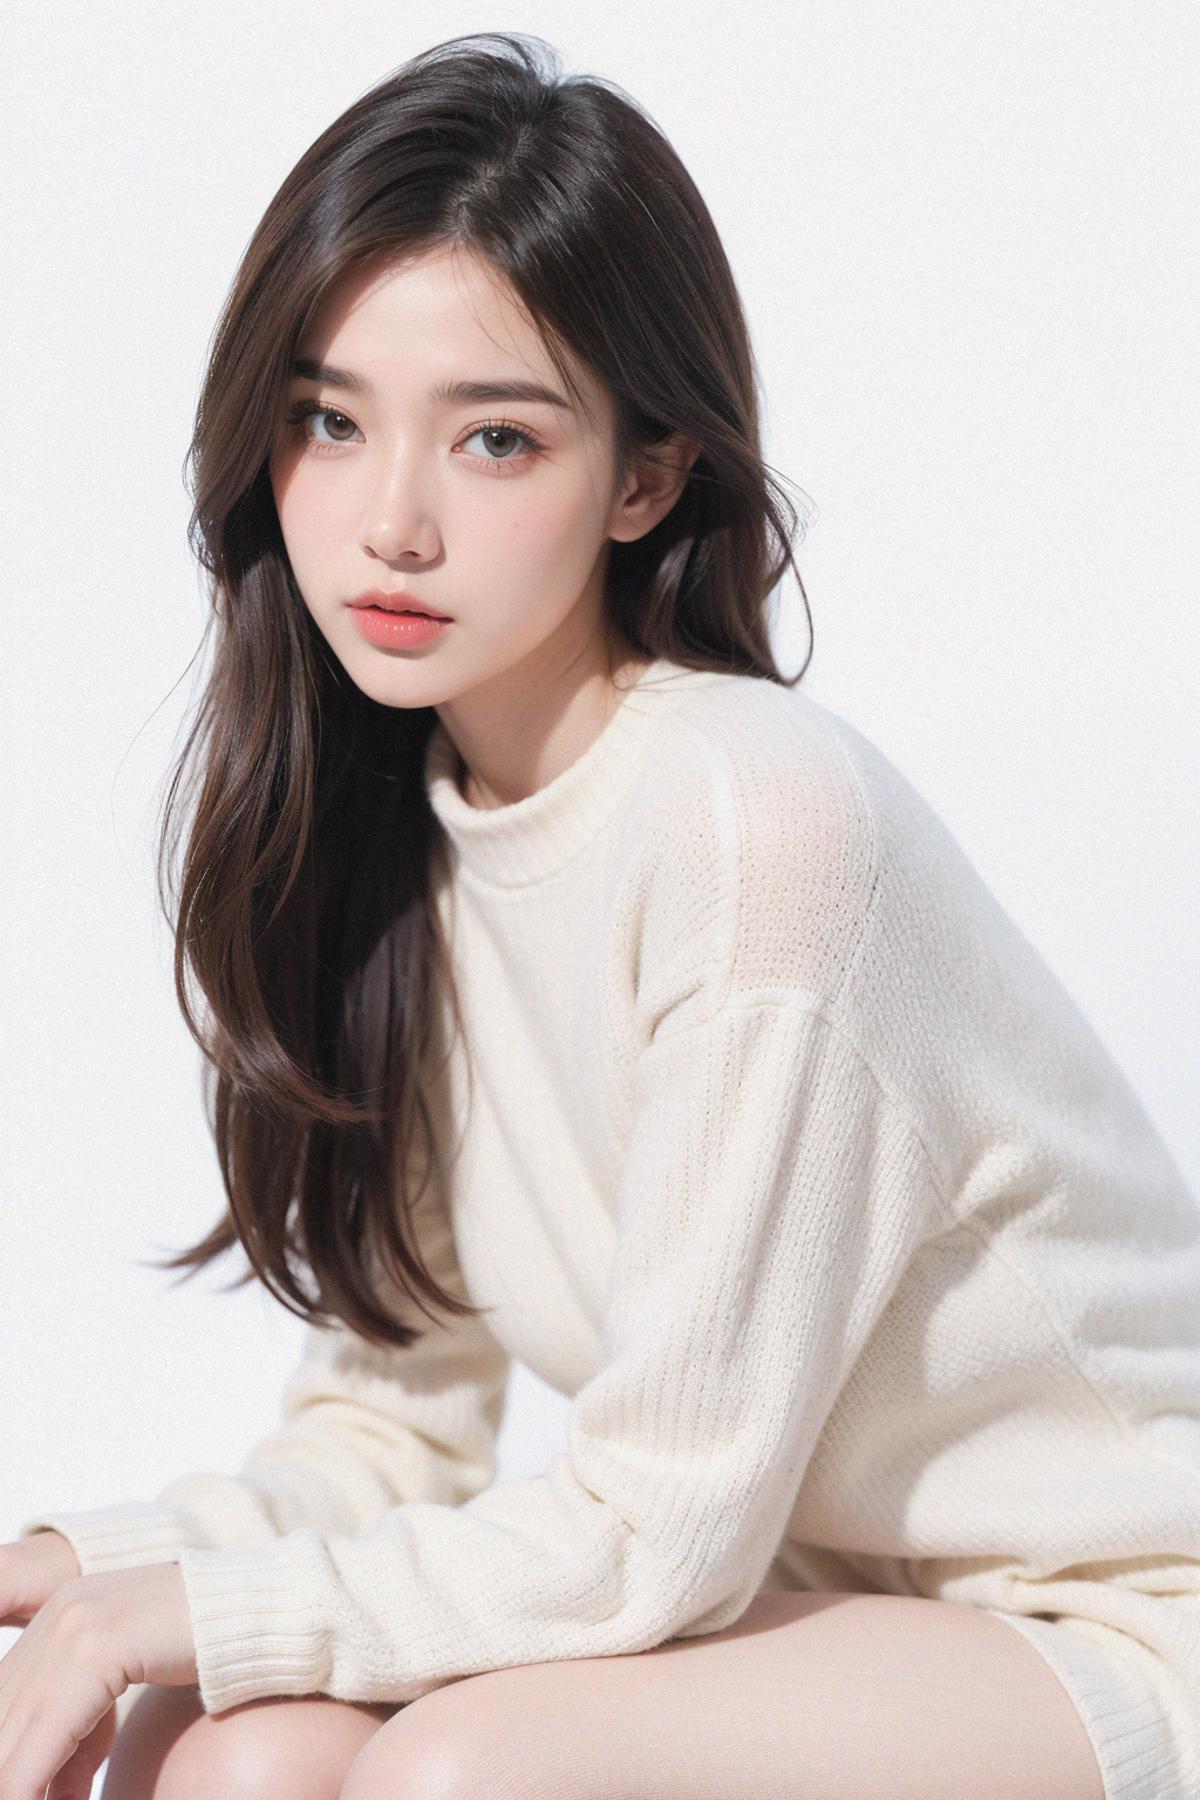 A young woman wearing a white sweater.